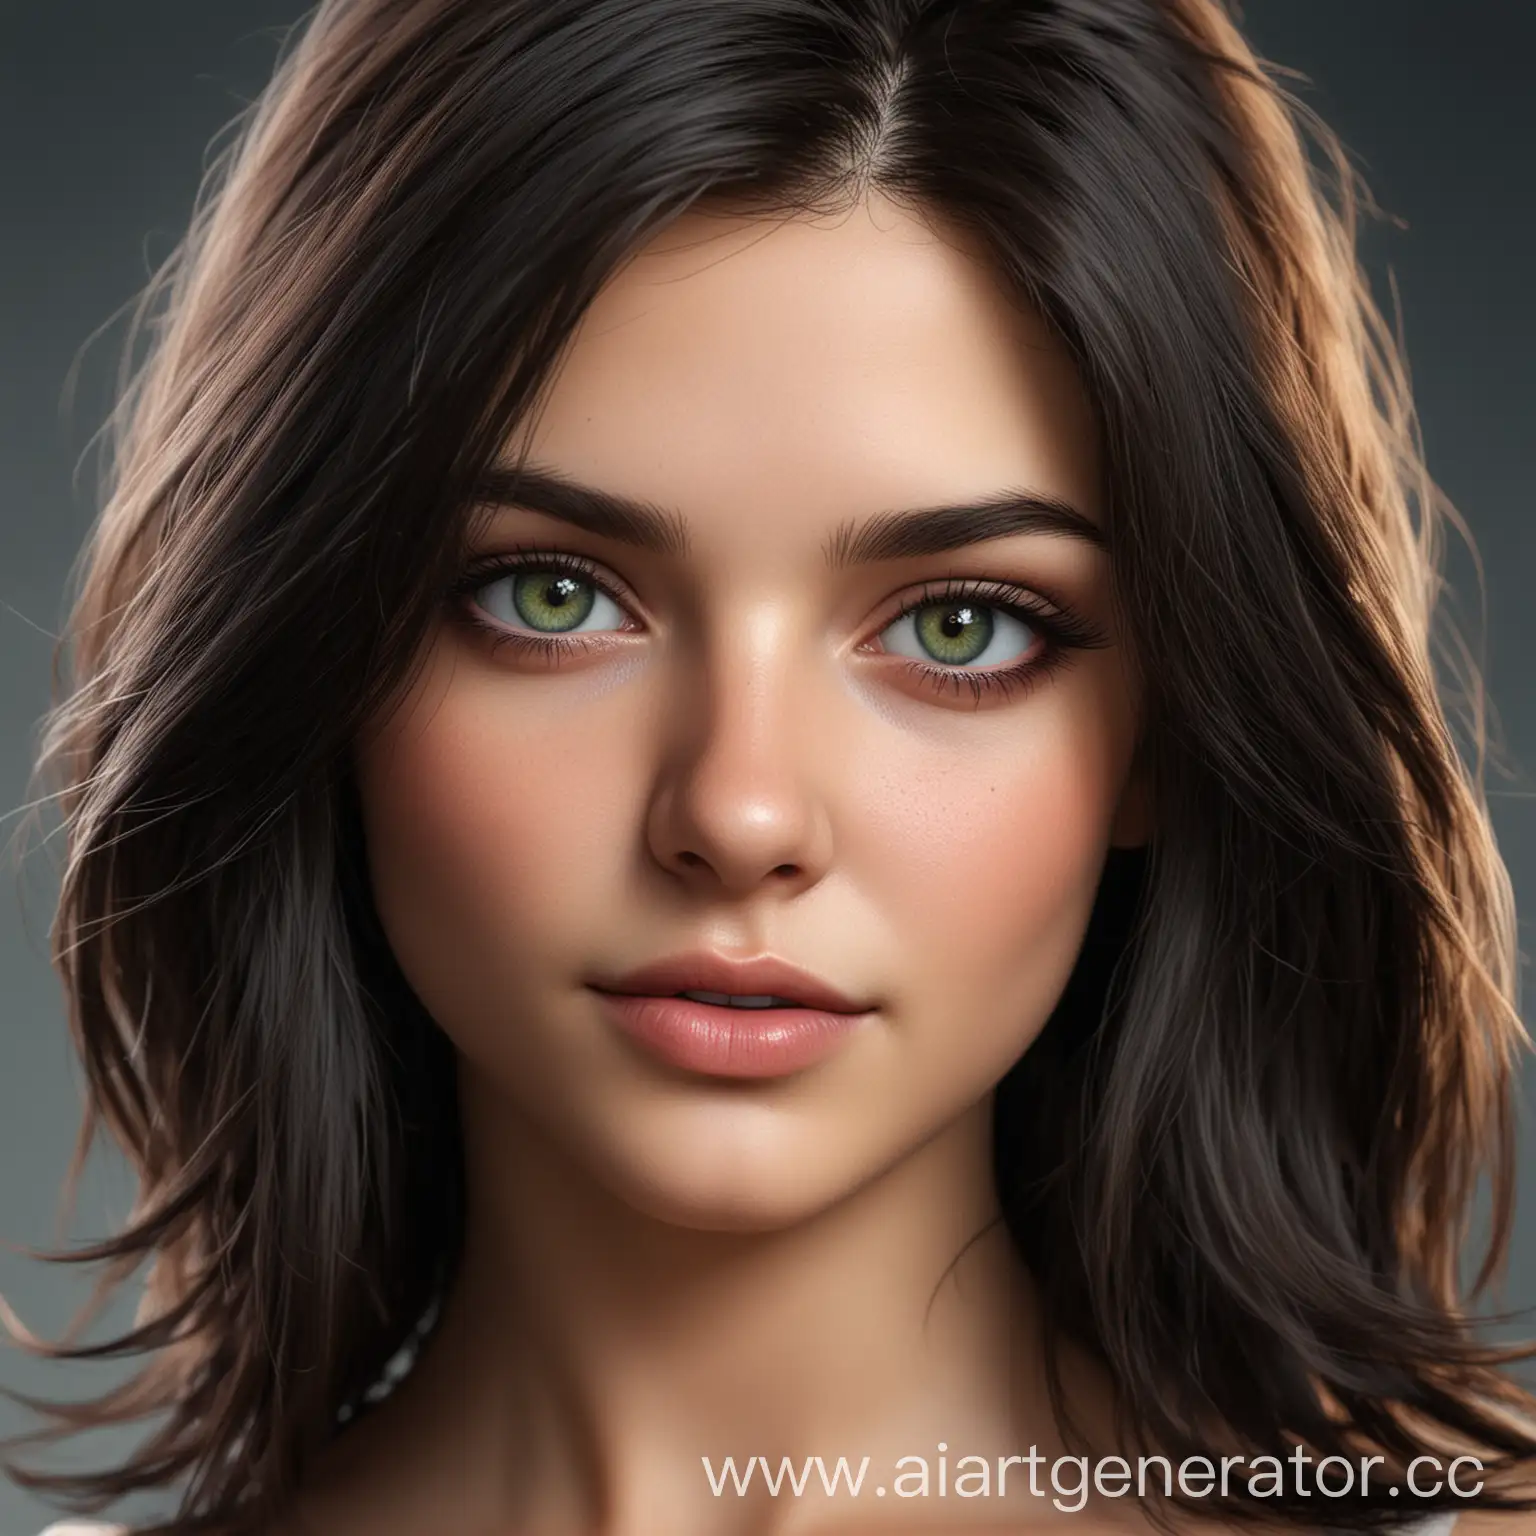 Realistic pretty girl with green eyes and shoulder length dark hair